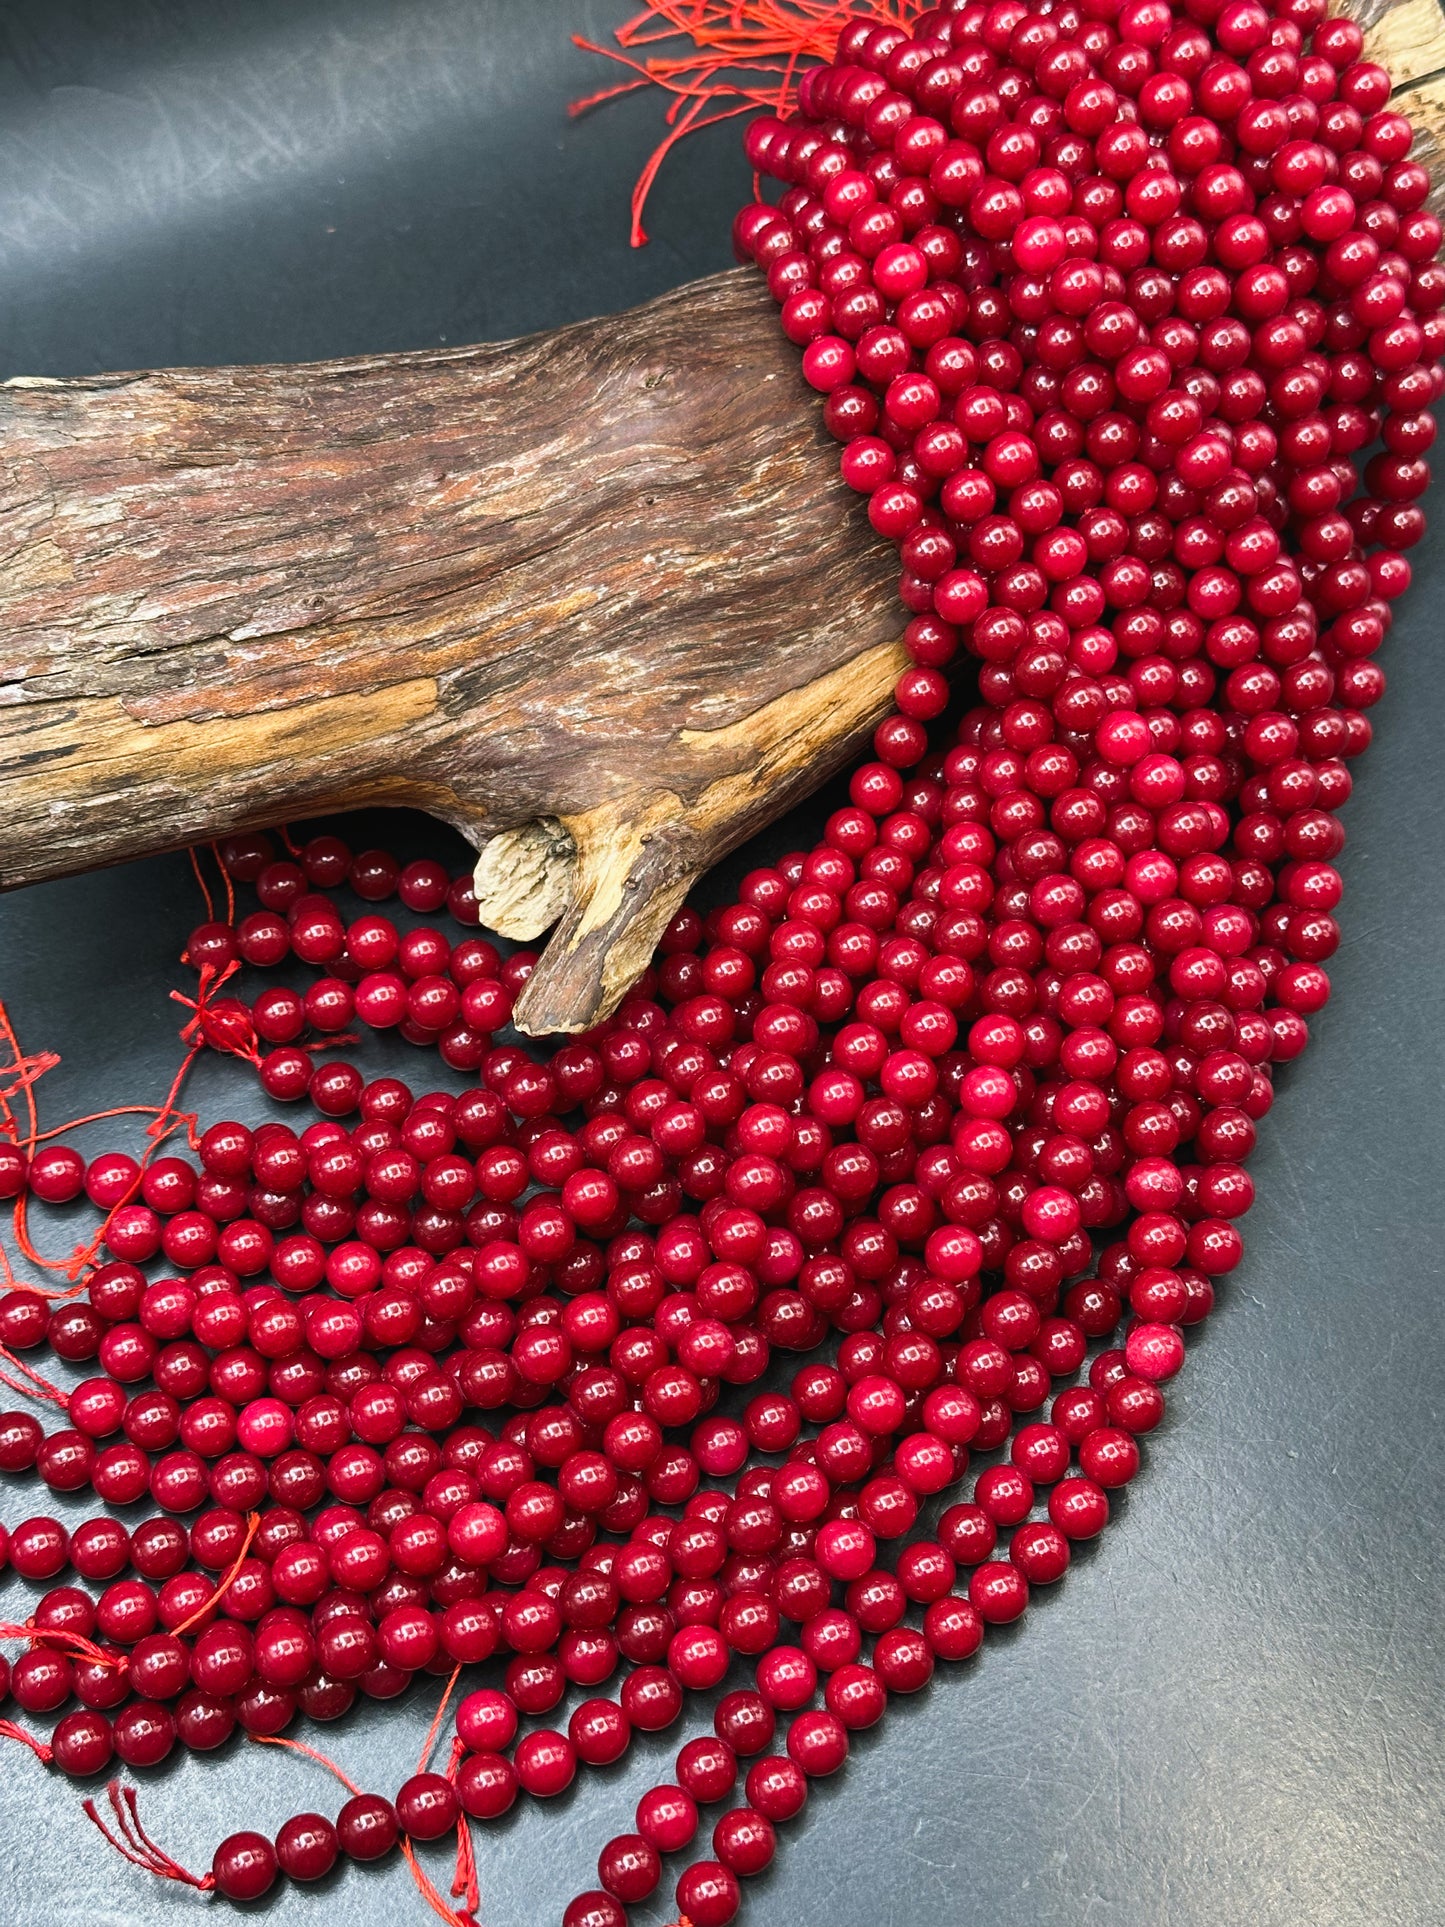 Natural Red Jade Gemstone Bead Smooth 6mm 8mm 10mm Round Beads, Gorgeous Deep Red Color Jade Gemstone Beads Full Strand 15.5"